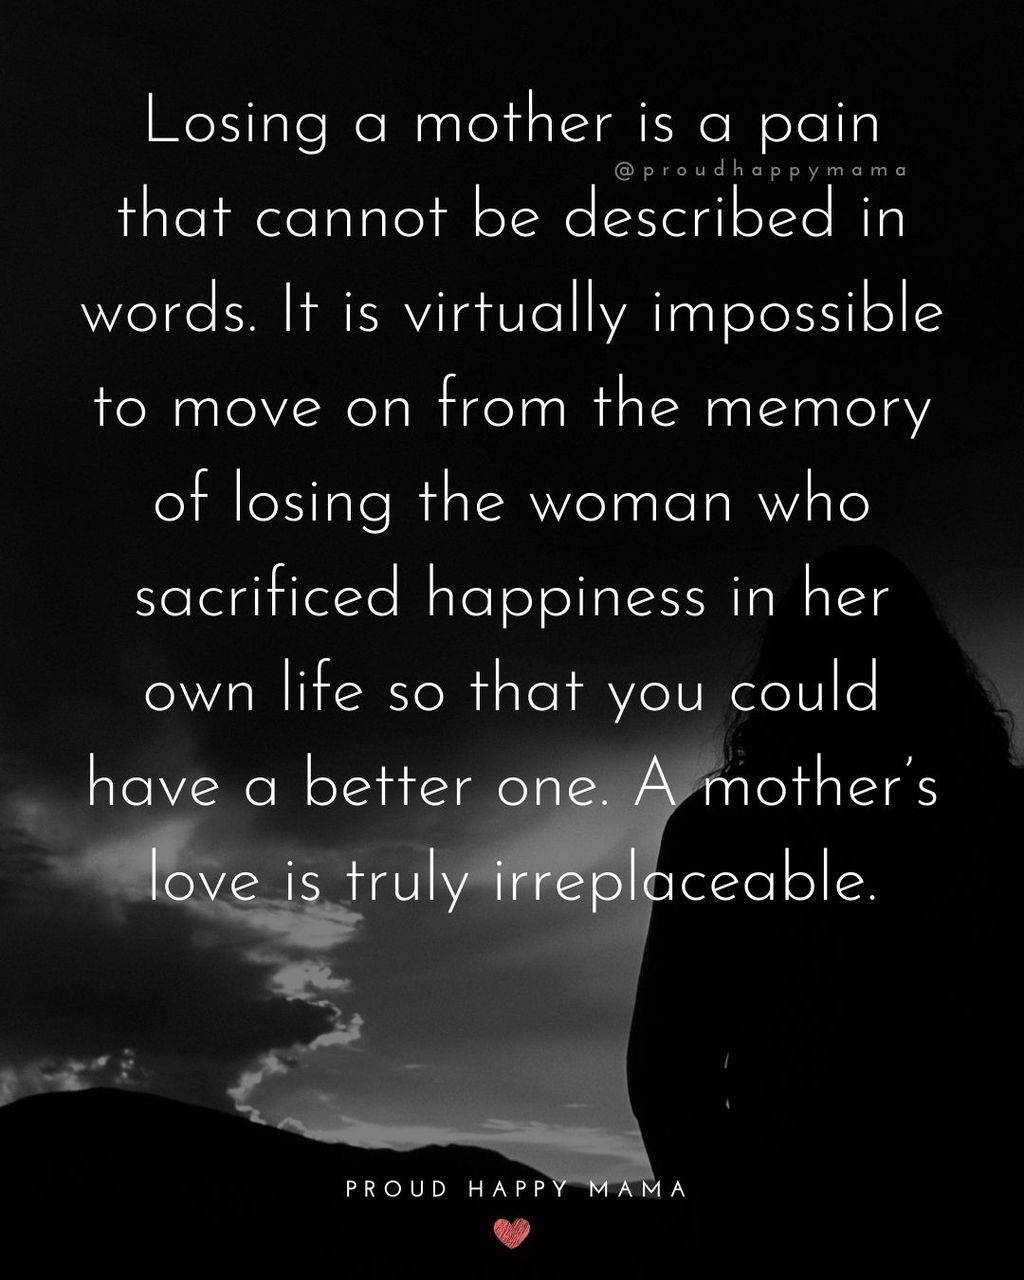 Black and white photo of woman looking up to the sky with text overlay, ‘Losing a mother is a pain that cannot be described in words. It is virtually impossible to move on from the memory of losing the woman who sacrificed happiness in her own life so that you could have a better one. A mother’s love is truly irreplaceable.’